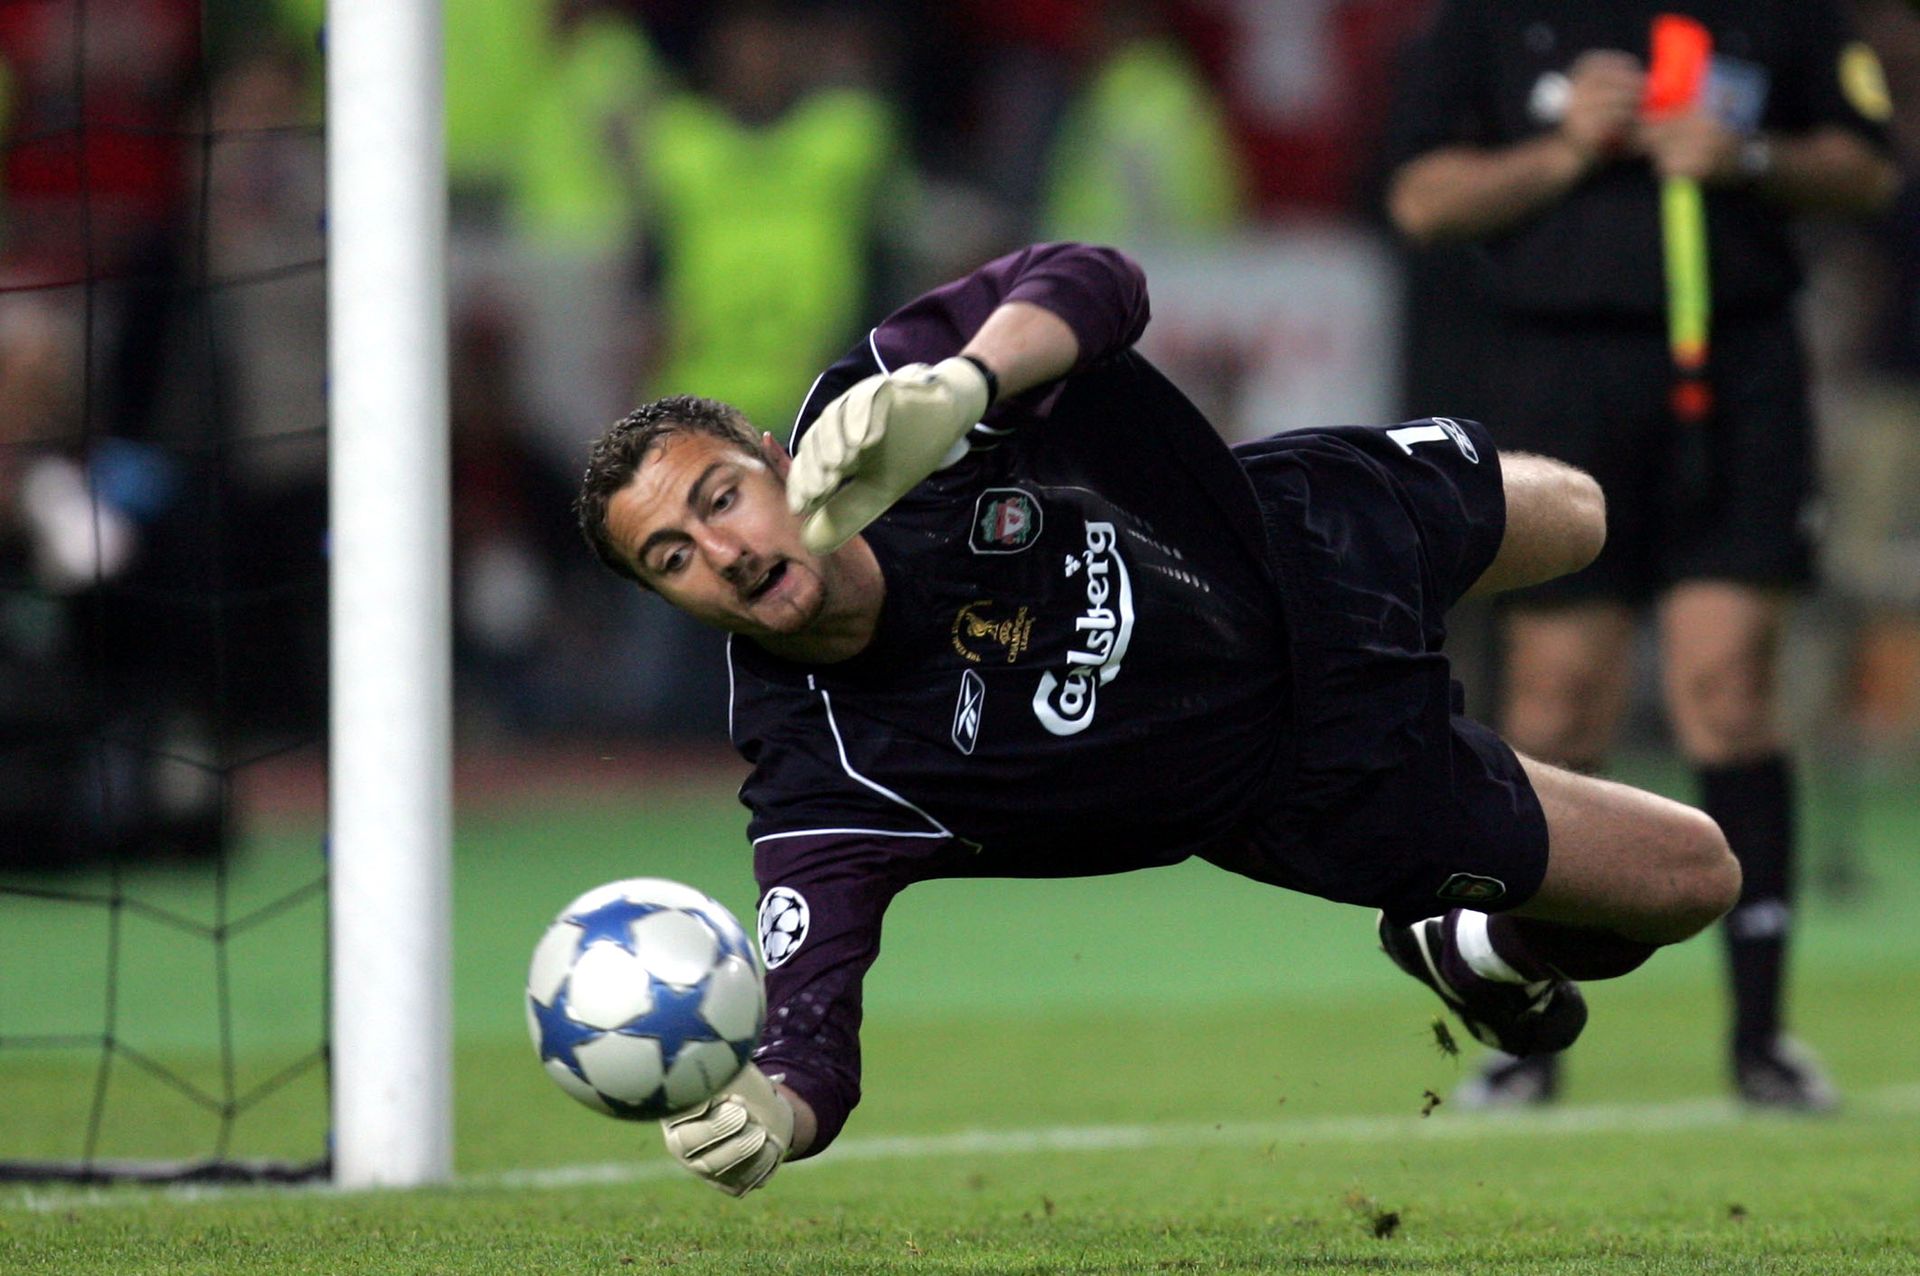 <p>                     Jerzy Dudek will be forever in the hearts of Liverpool fans for his heroics in Istanbul on the night of May 25th, 2005.                   </p>                                      <p>                     After Liverpool had come back from three goals down in the Champions League final against AC Milan, the Polish goalkeeper made an extraordinary double save from Andriy Shevchenko in extra time and went on to stop two penalties in the shootout as the Reds claimed an incredible victory. Dudek later joined Real Madrid as back-up to Iker Casillas and won 60 caps for Poland.                   </p>